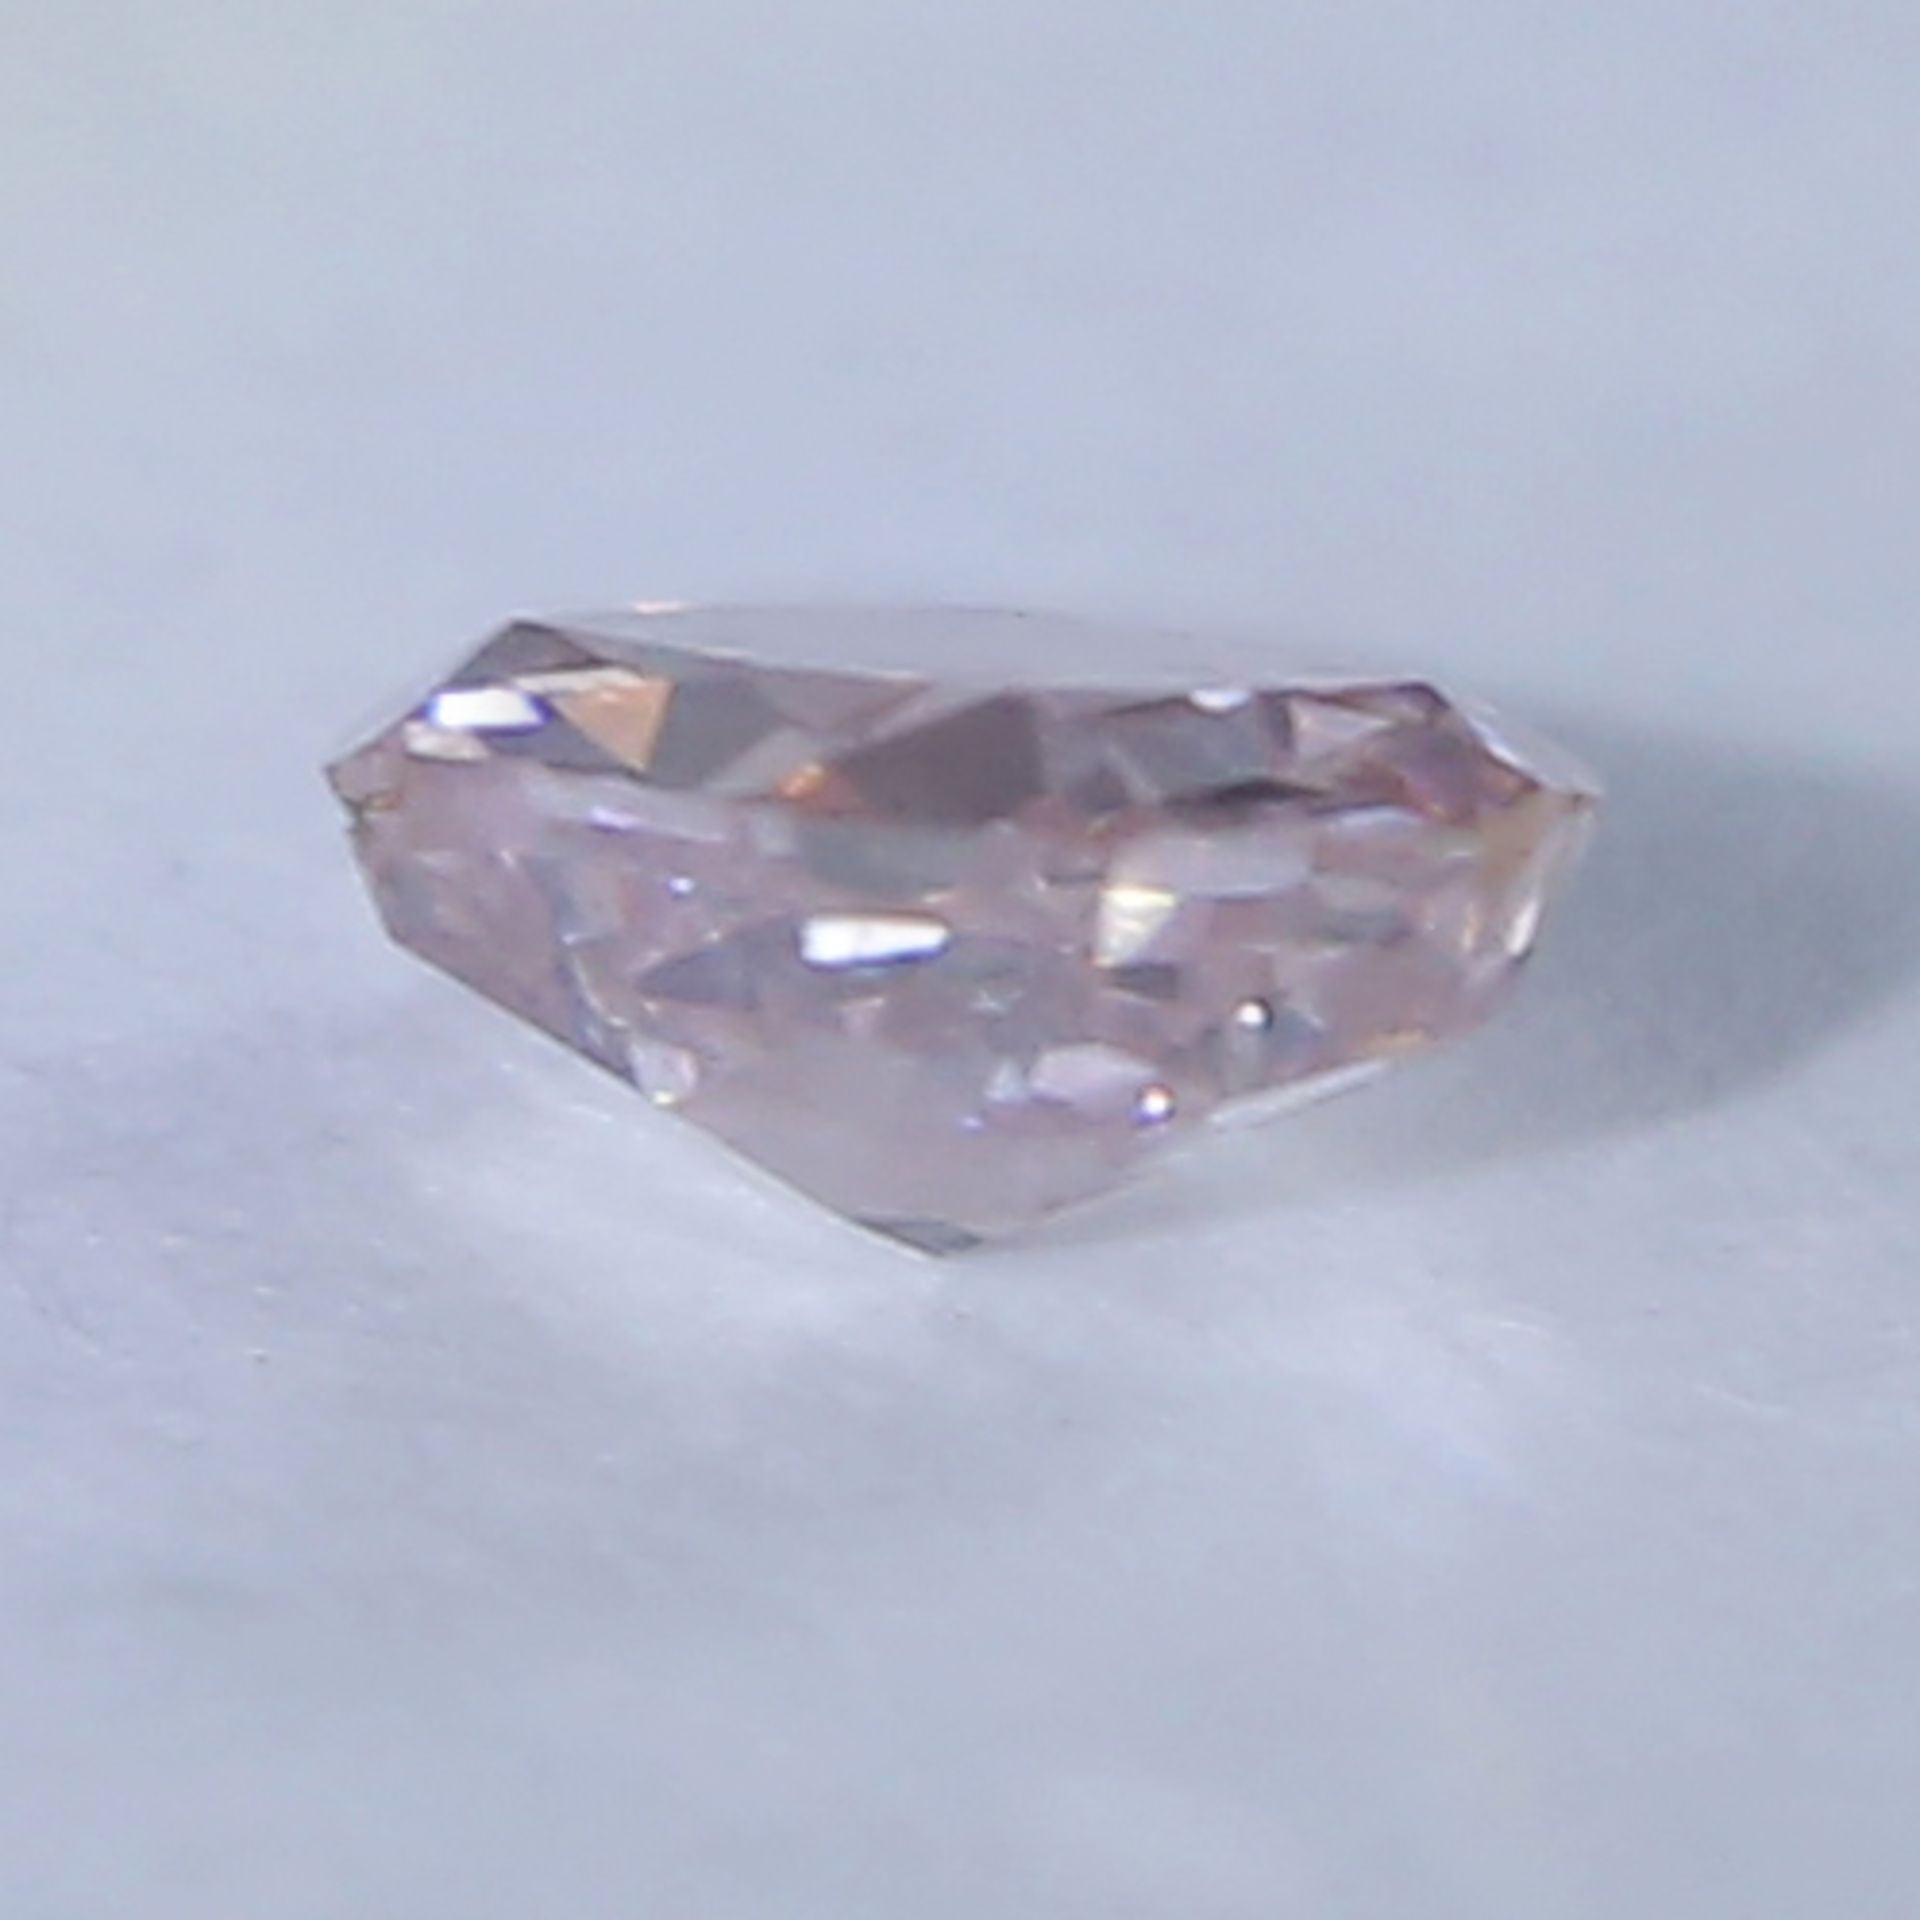 GIA Certified 0.08 ct. Fancy Orangy Pink Diamond - Image 9 of 10